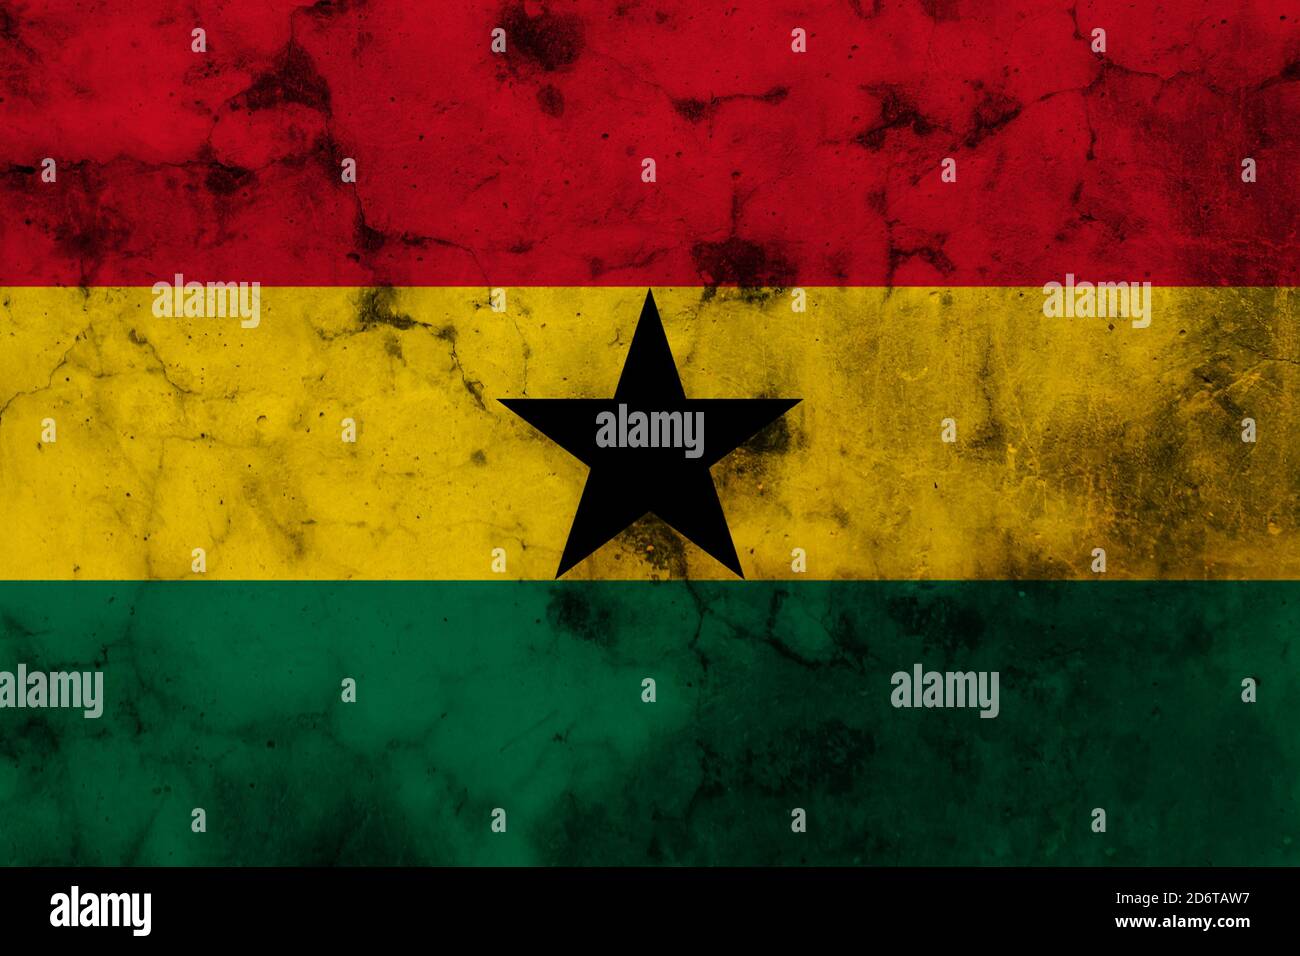 grunge flag of Ghana with capital in Accra Stock Photo